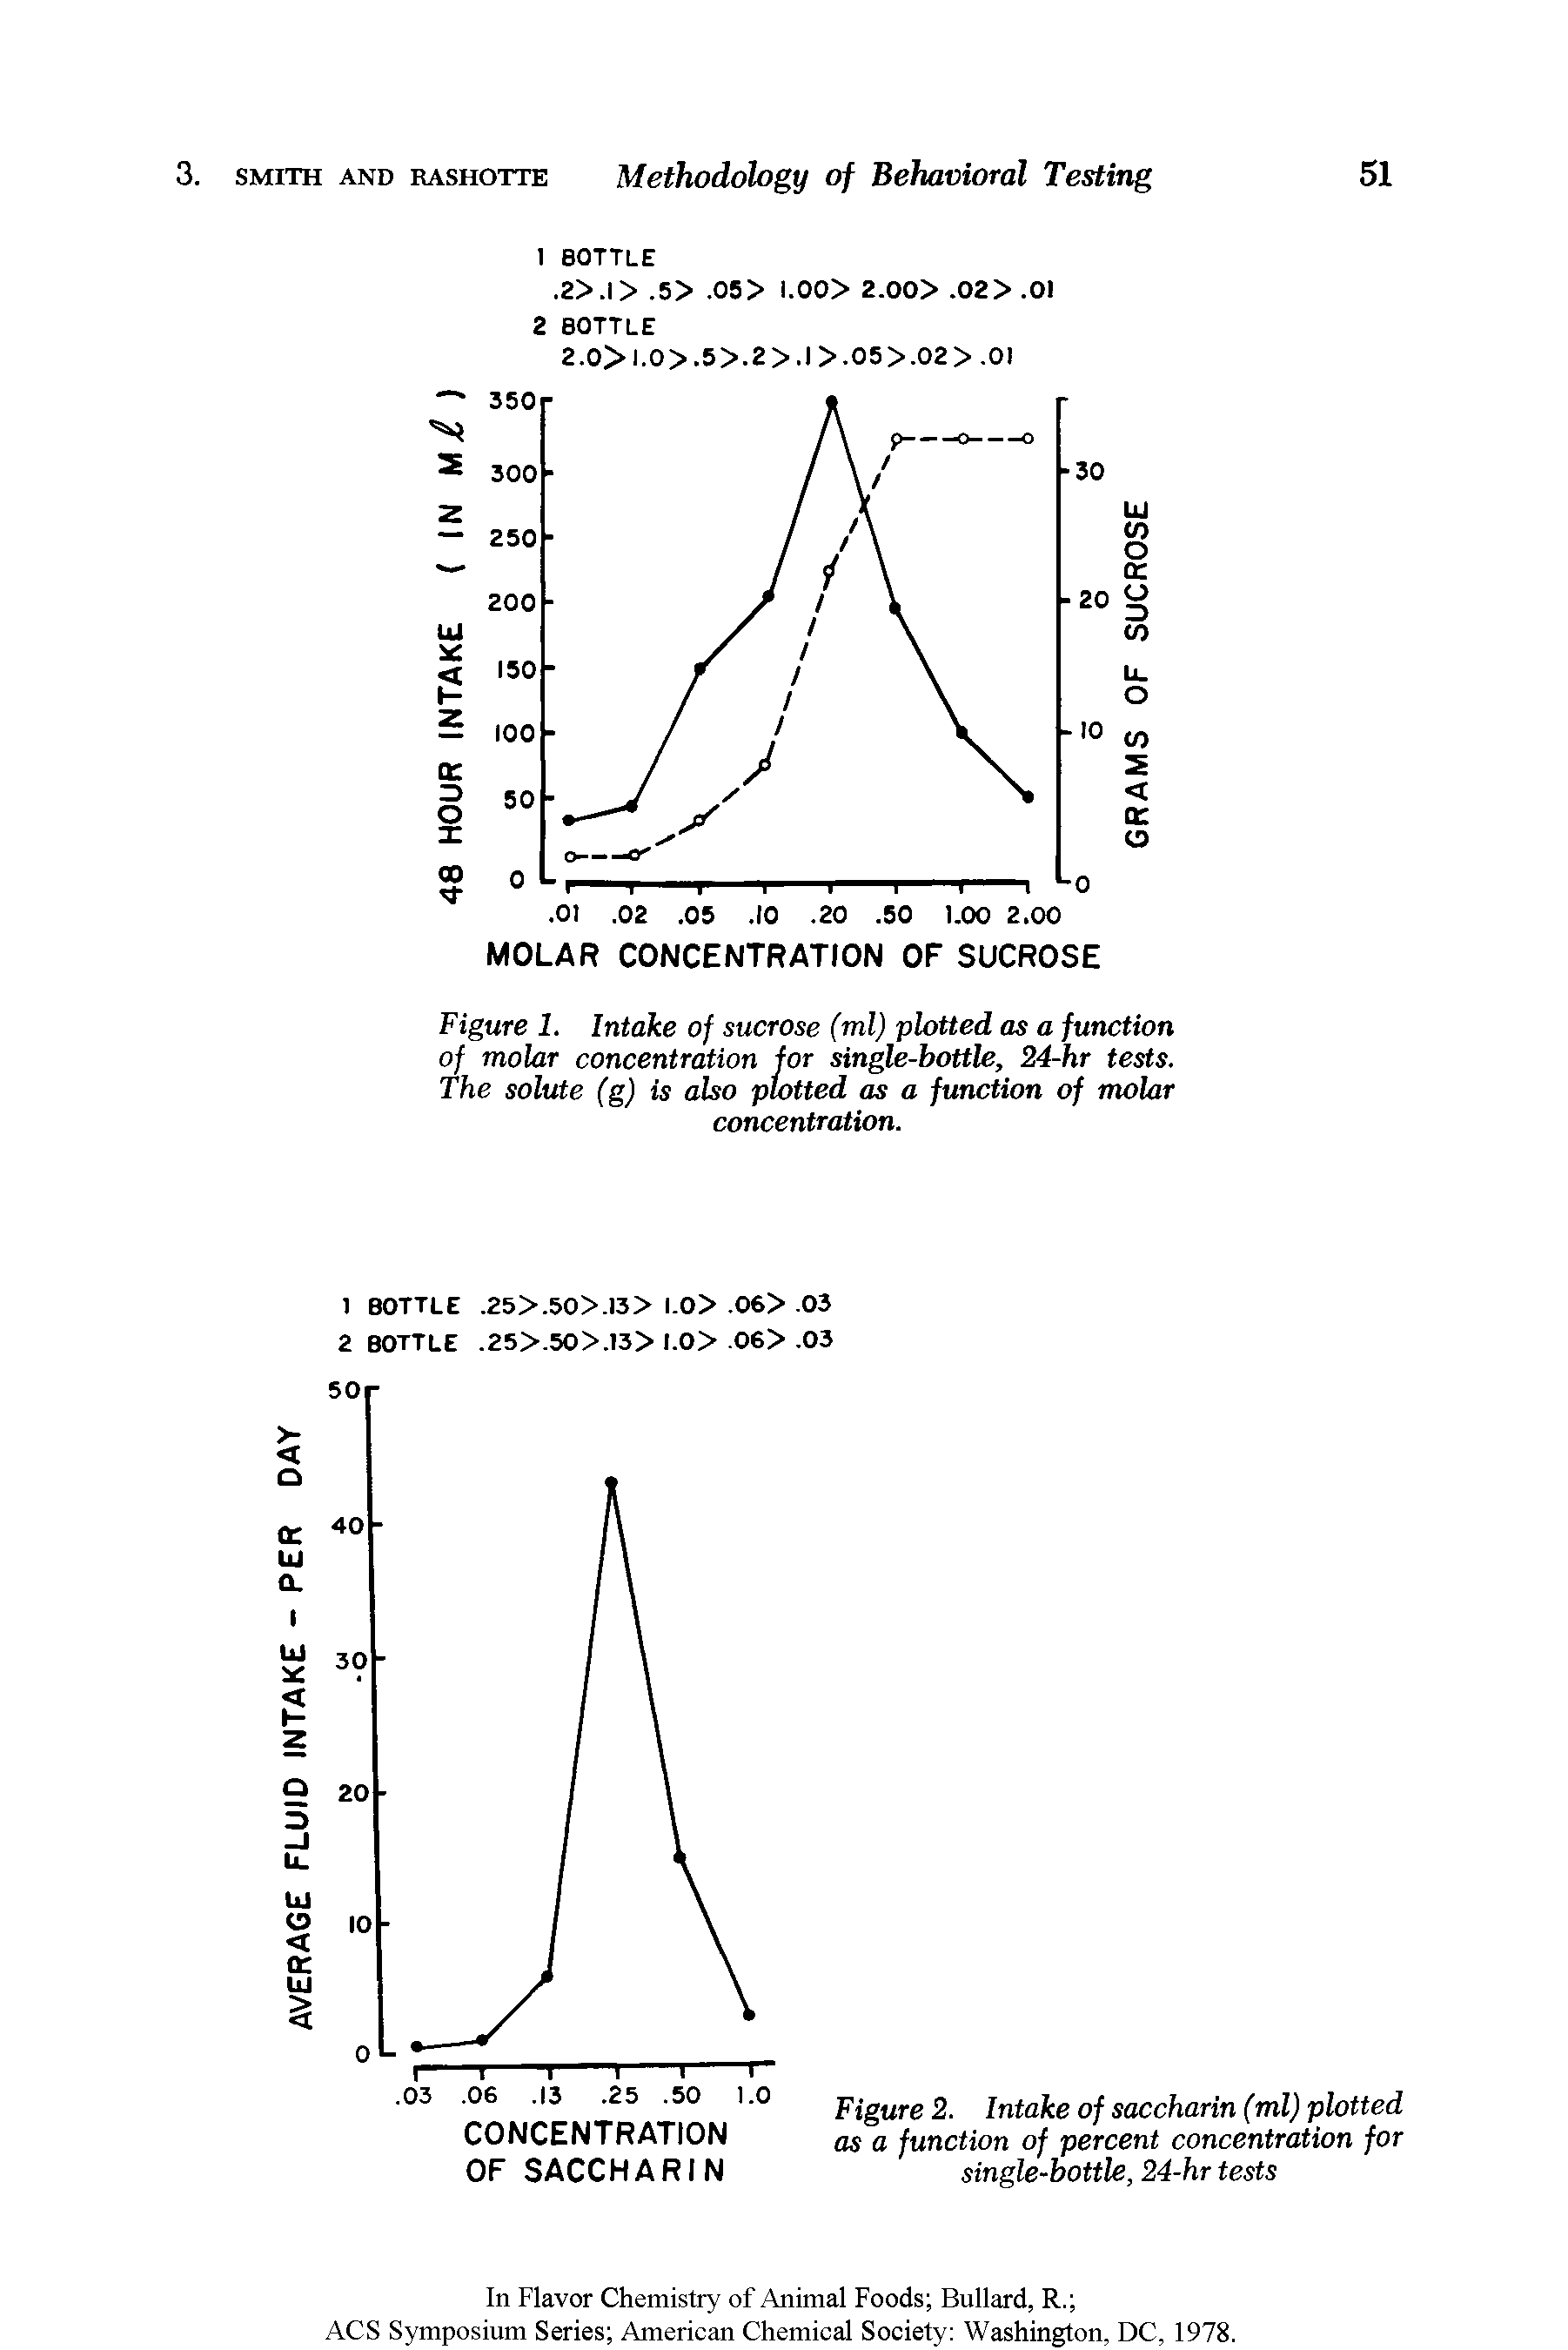 Figure 1. Intake of sucrose (ml) plotted as a function of molar concentration for single-bottle, 24-hr tests. The solute (g) is also plotted as a function of molar concentration.